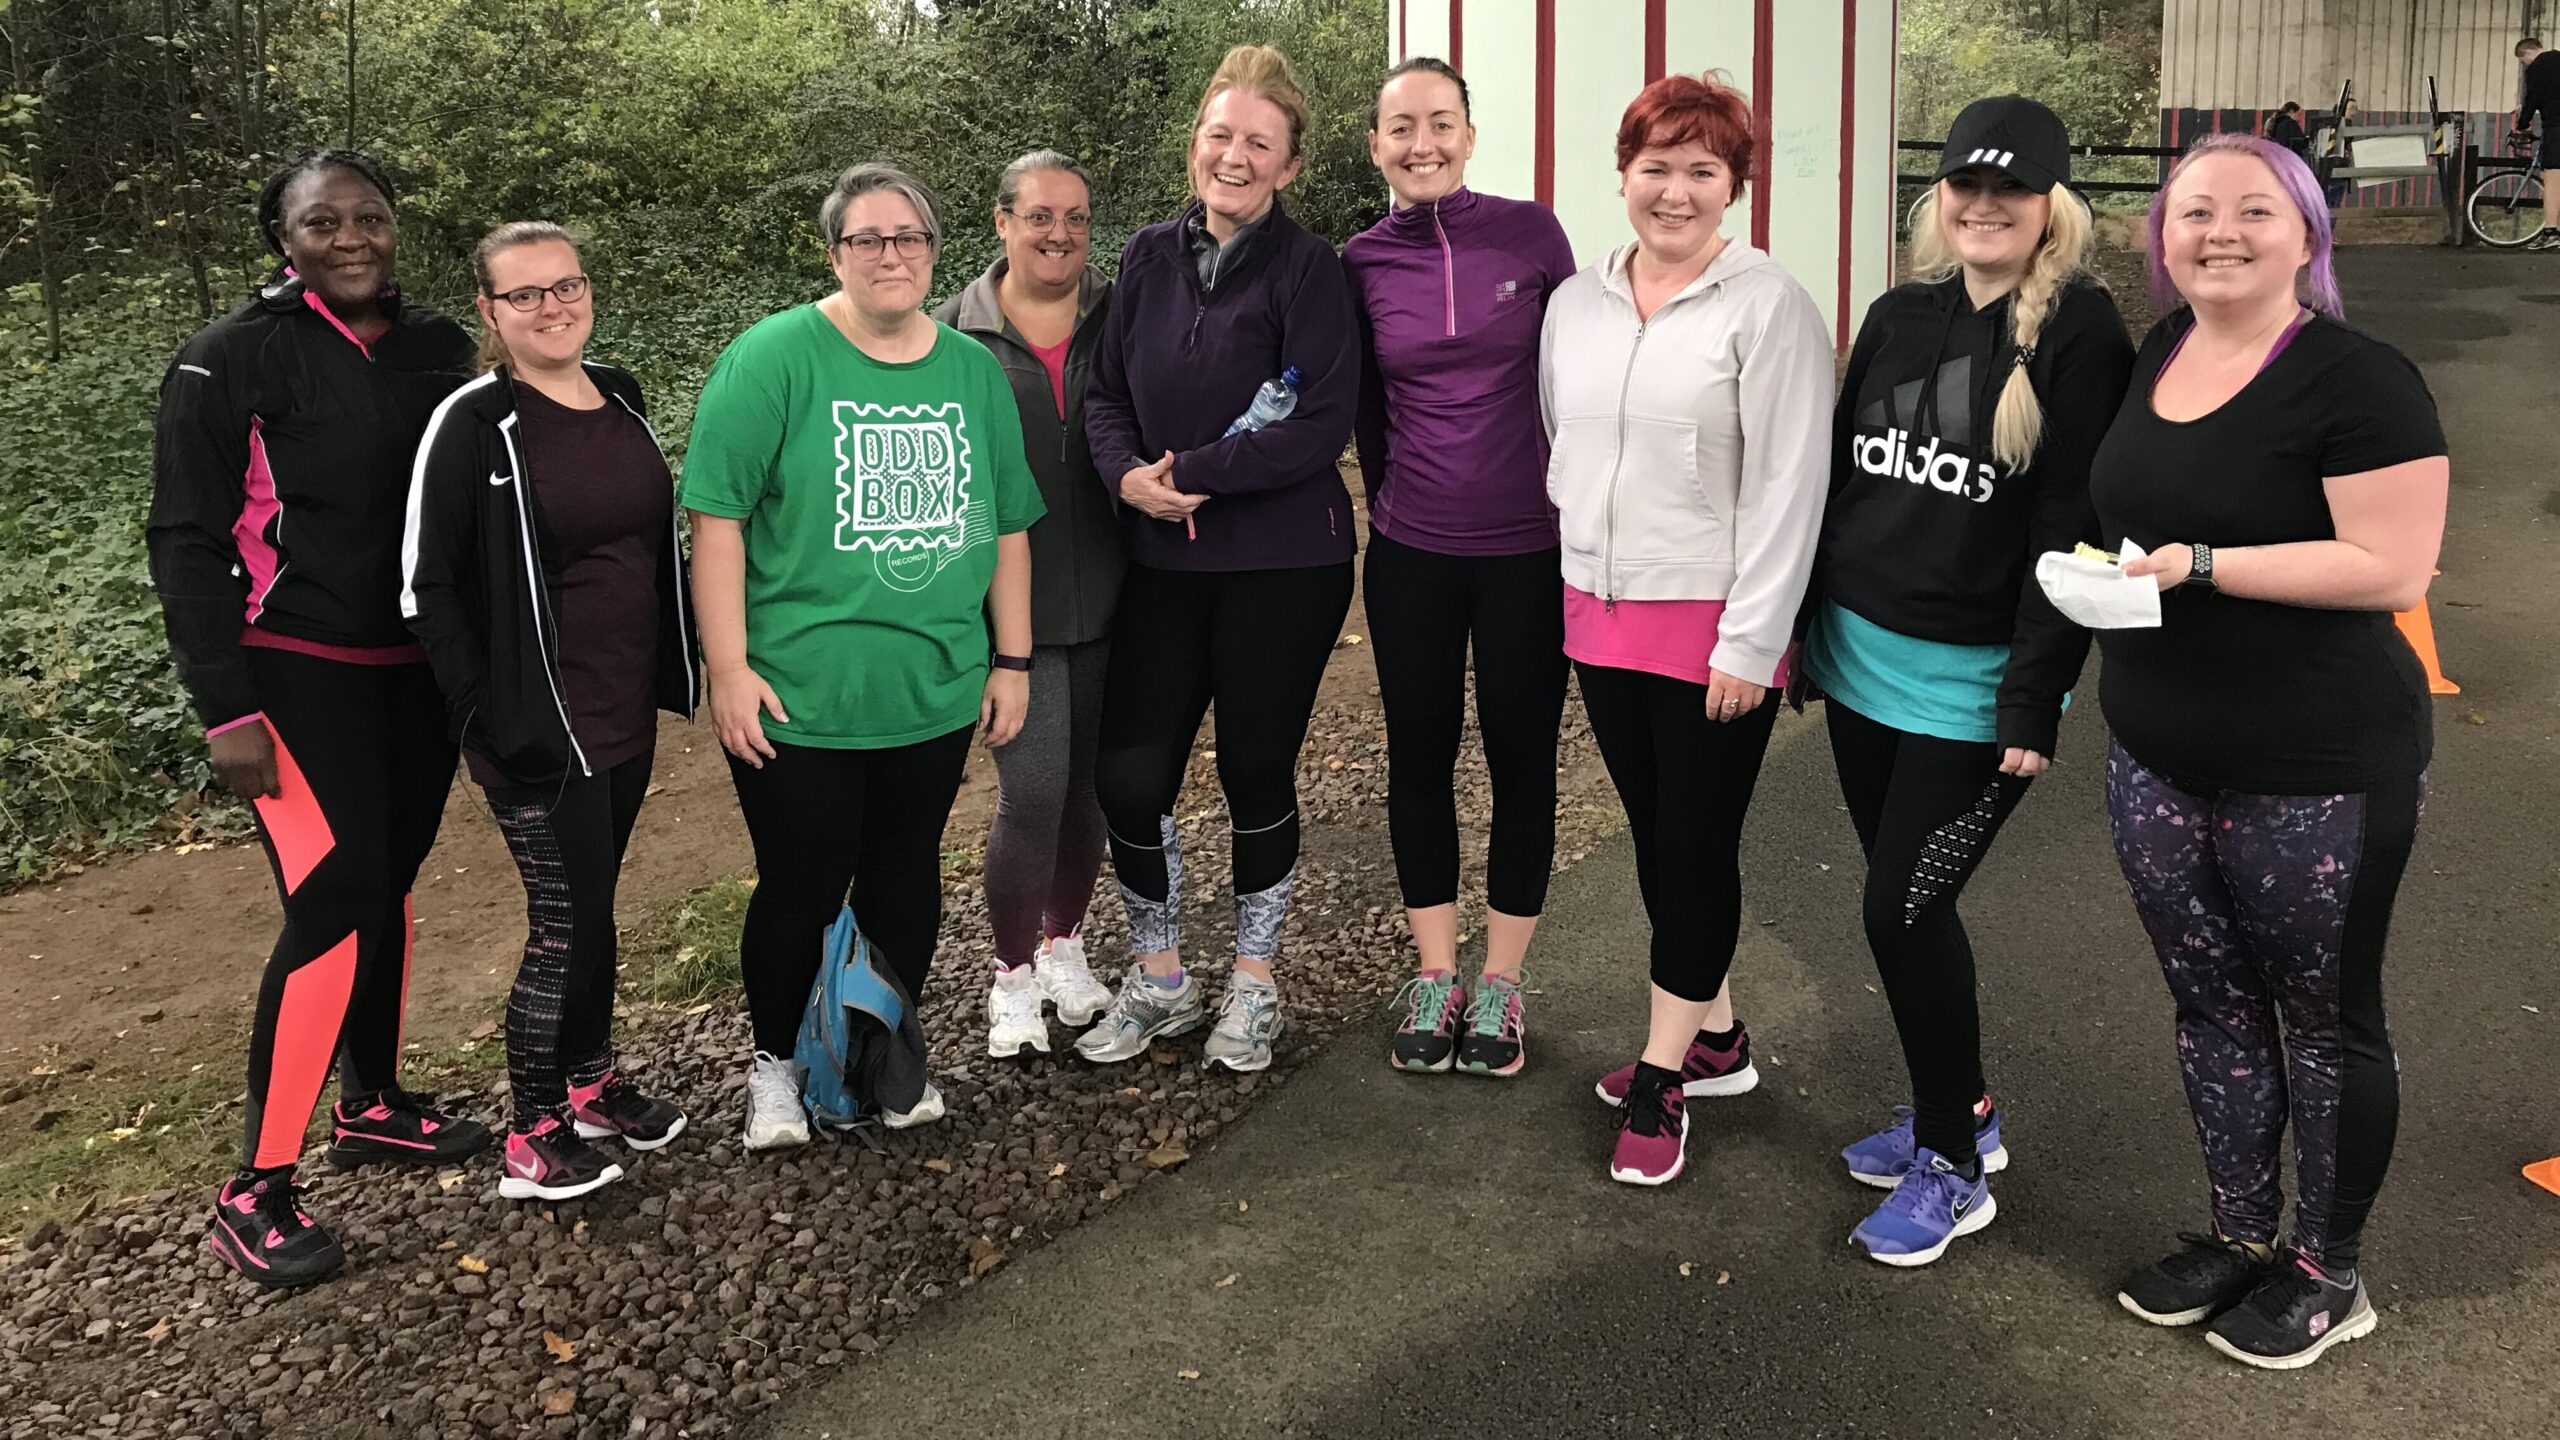 9 absolute queens including Charlotte lined up for a photo under the famous Grangemoor parkrun flyover having just completed their final Couch to 5k run. 